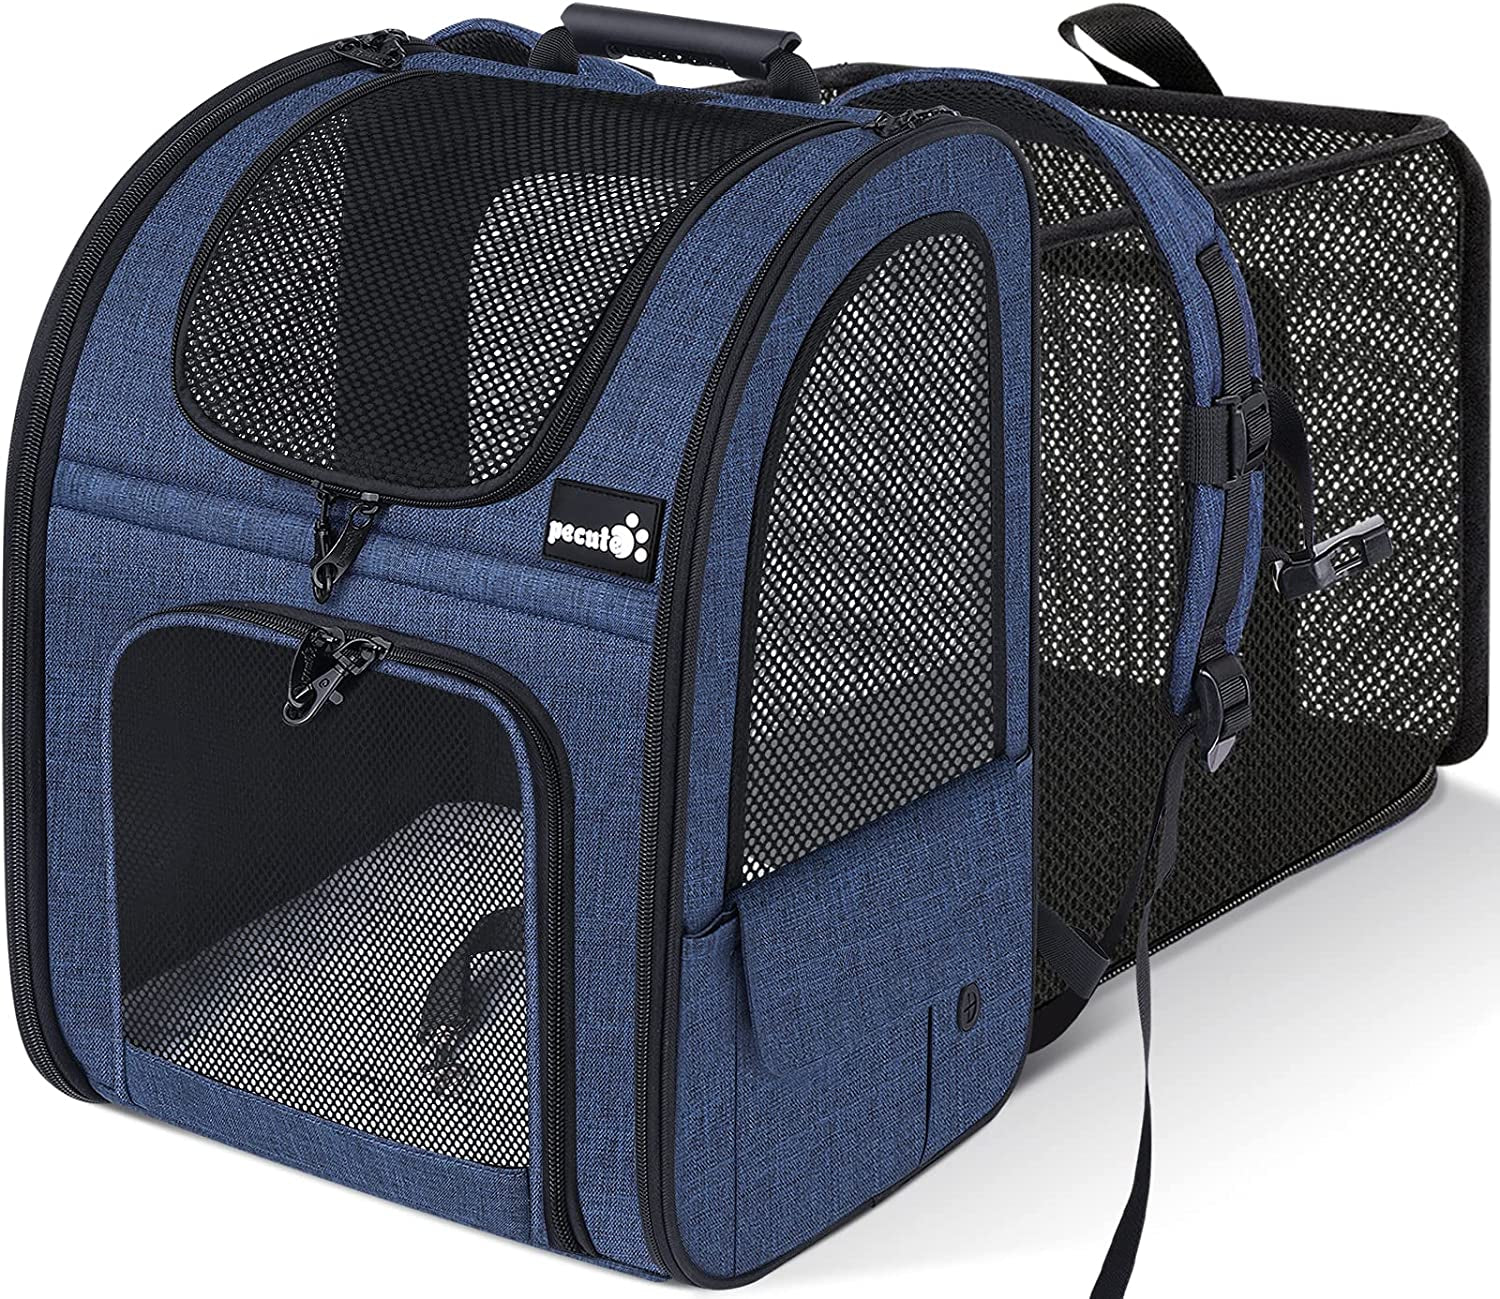 Pet Carrier Backpack, Dog Carrier Backpack, Expandable with Breathable Mesh for Small Dogs Cats Puppies, Pet Backpack Bag for Hiking Travel Camping Outdoor Hold Pets up to 18 Lbs